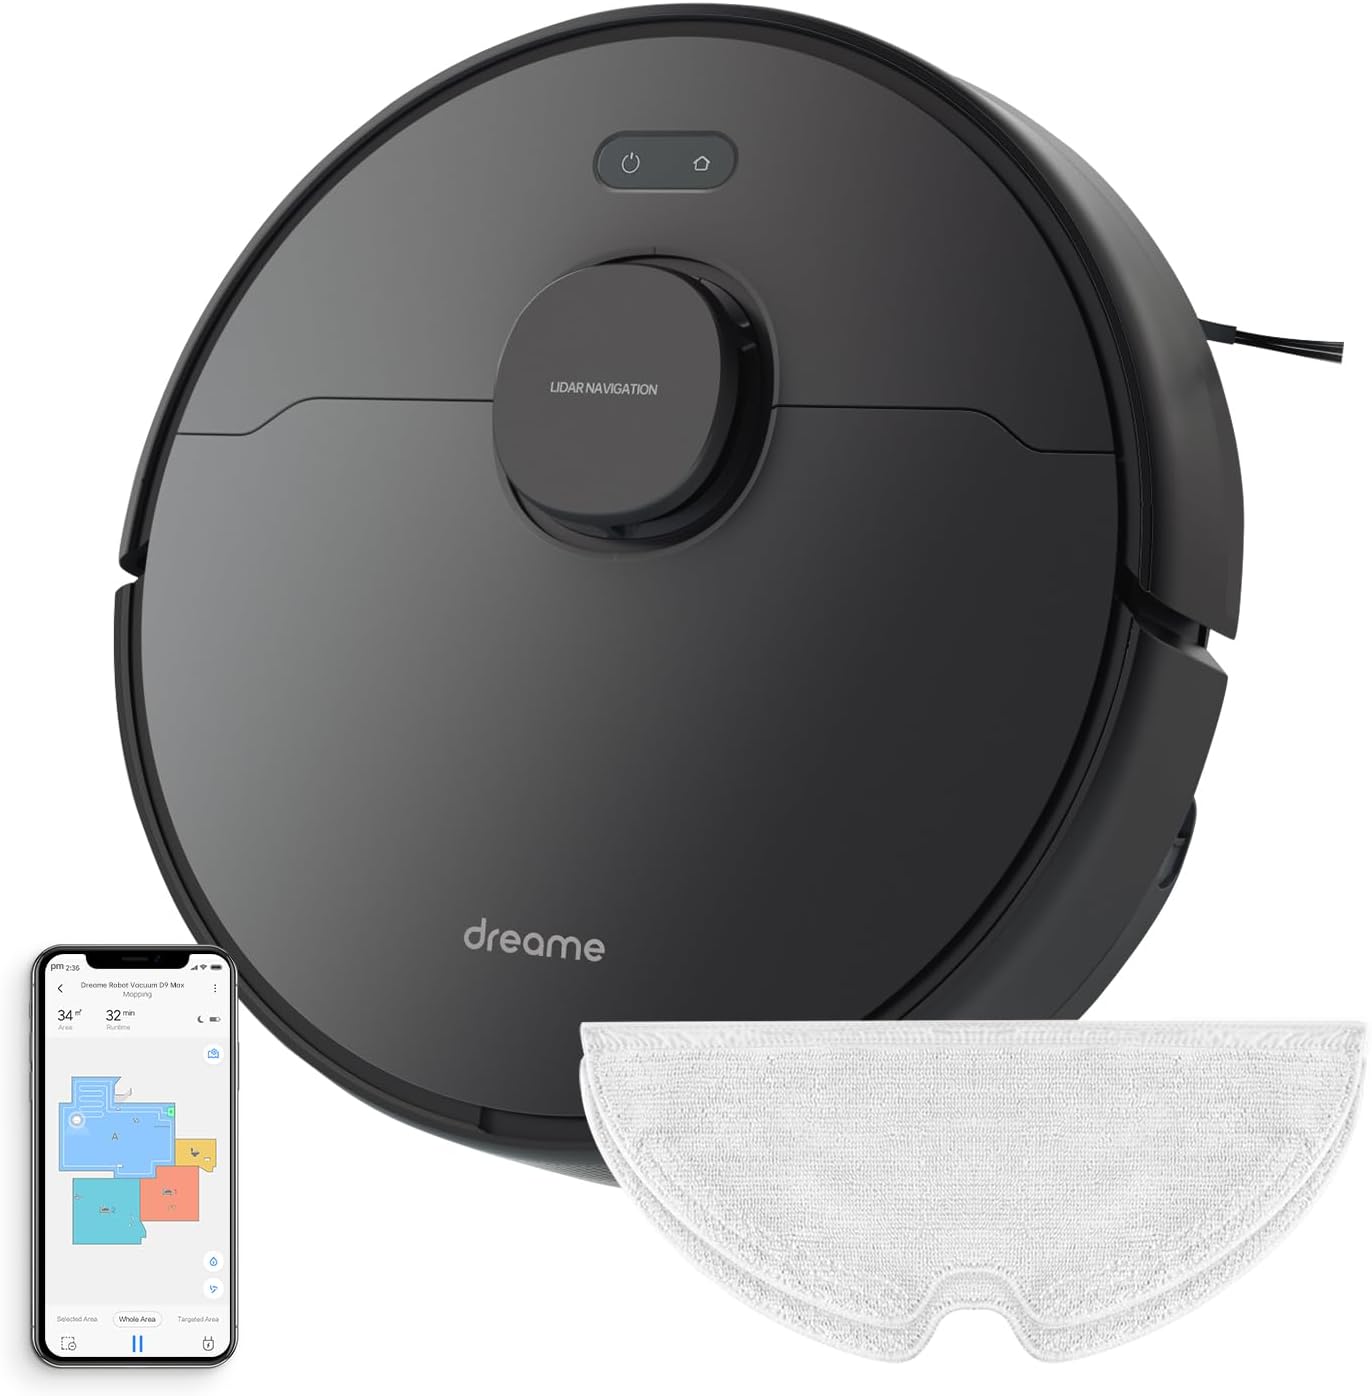 Dreametech D9 Max Review: Experience Powerful Cleaning